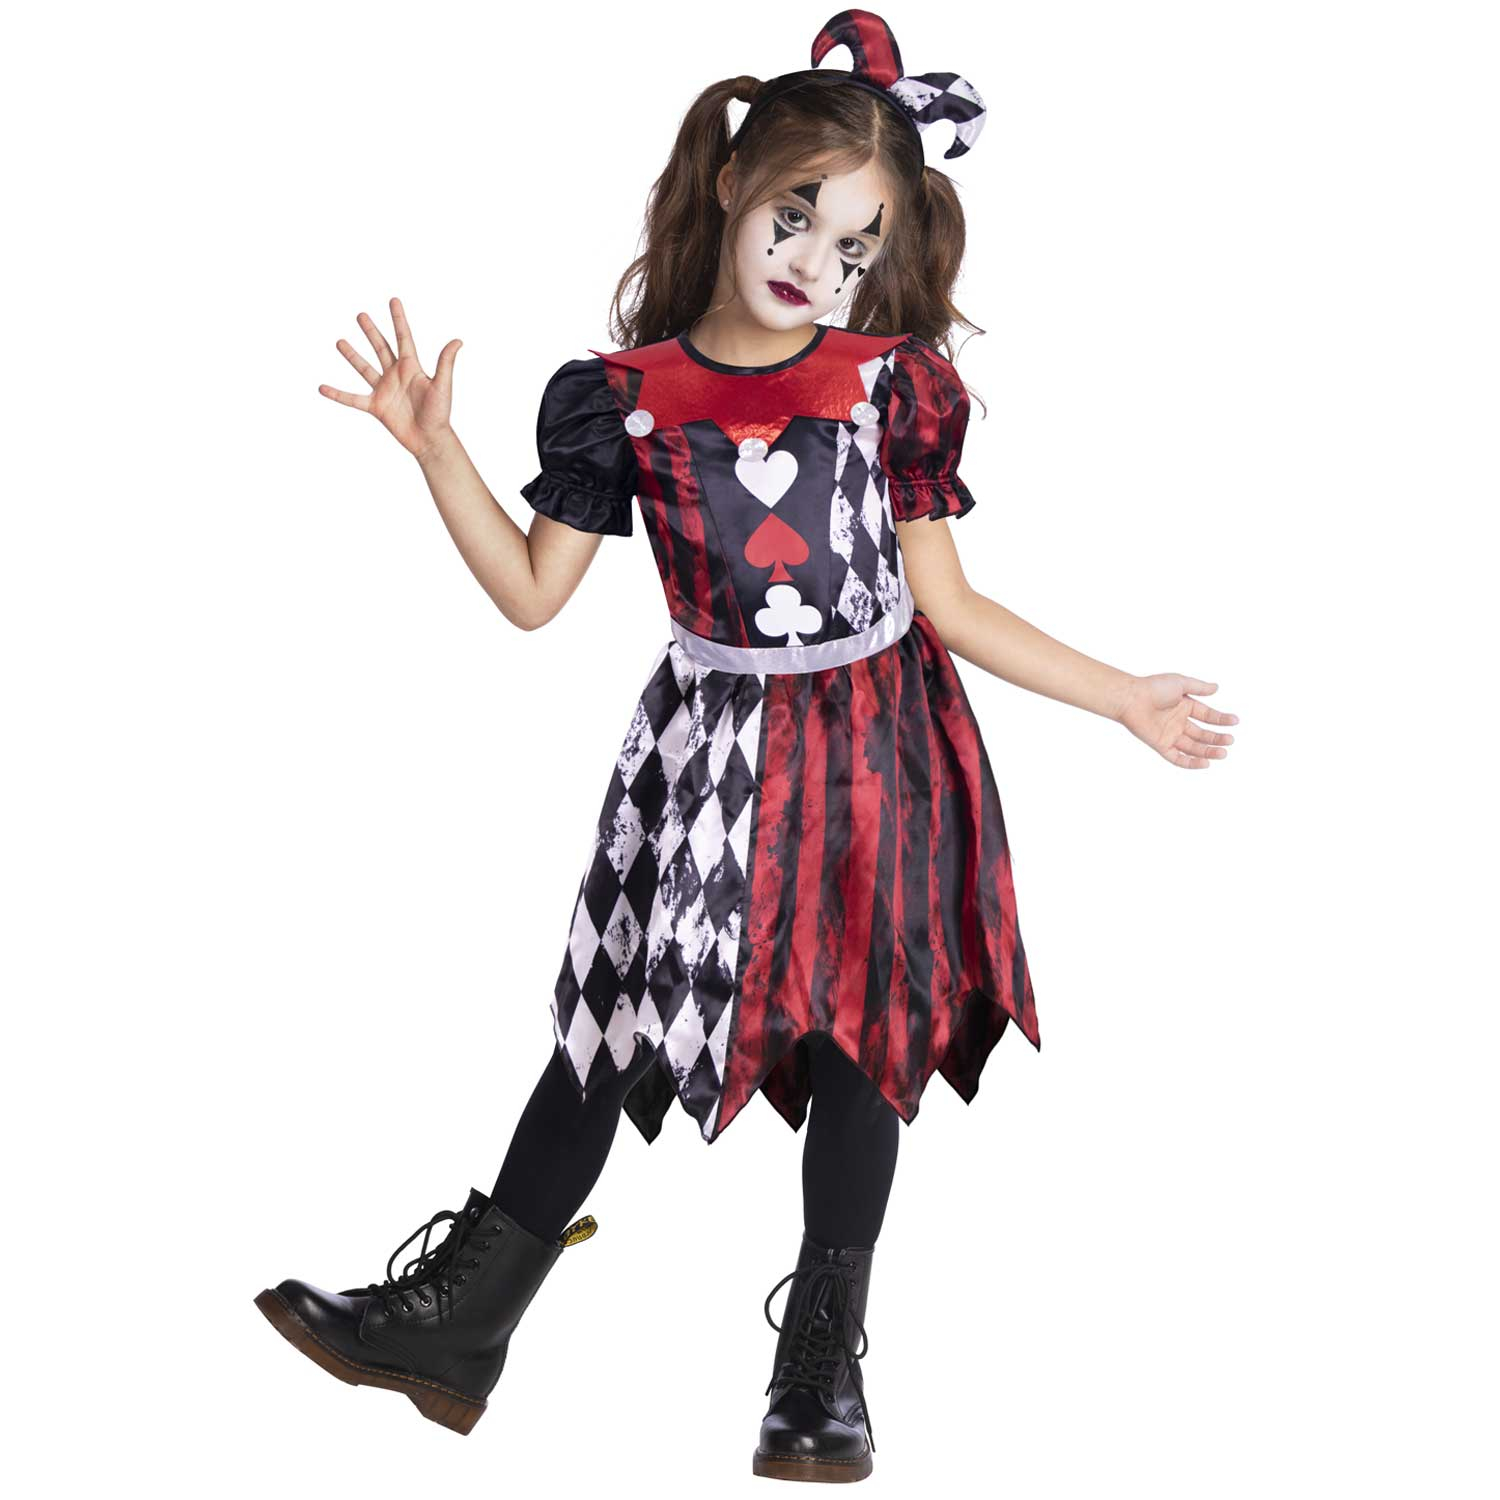 Jester Girl Red Costume - Age 8-10 Years - 1 PC : Amscan International